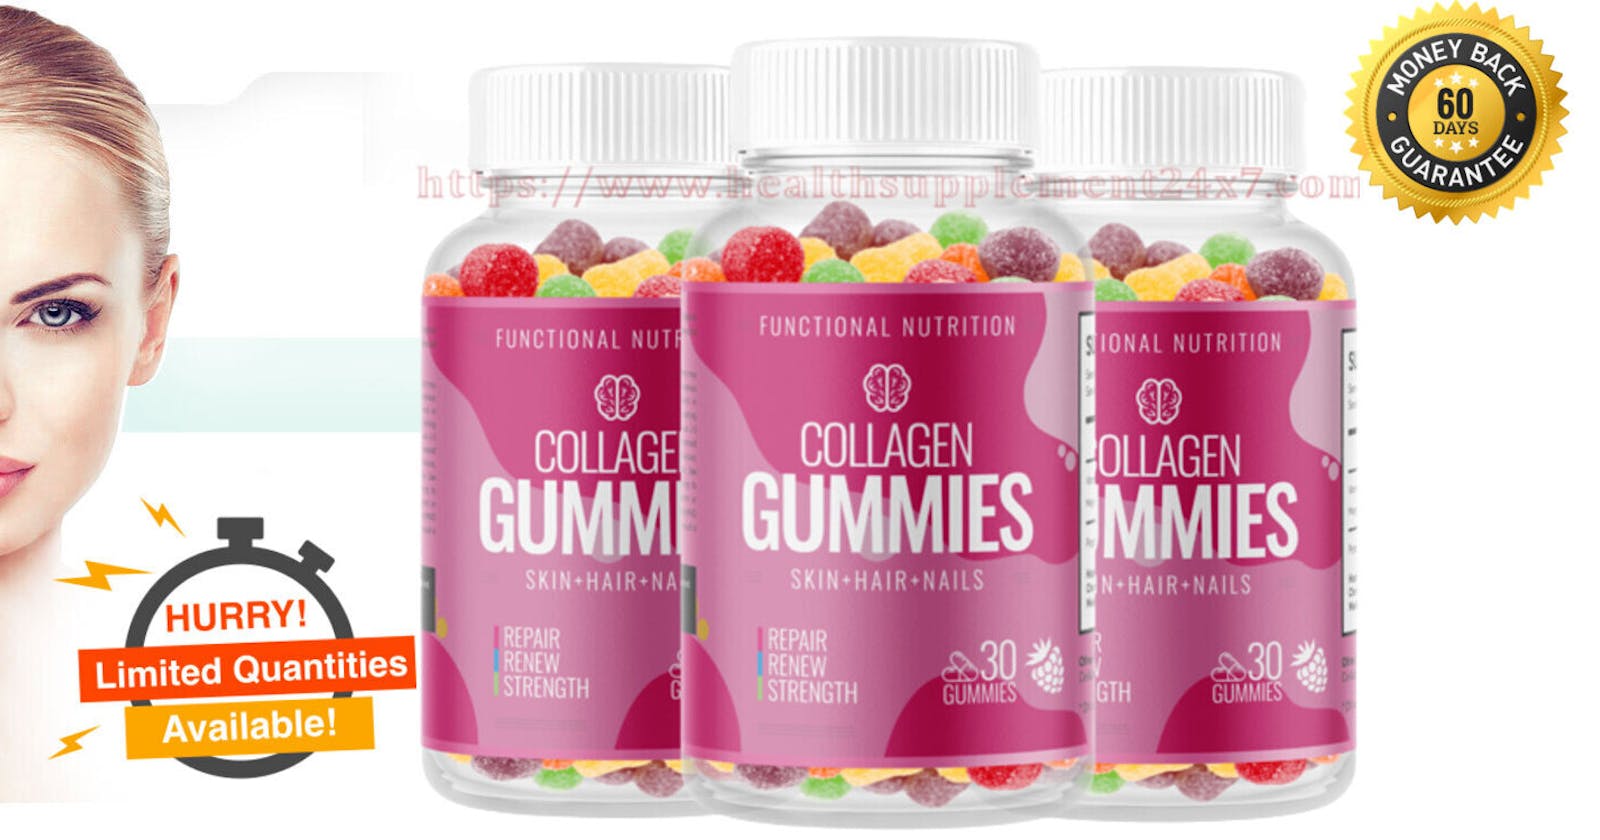 Functional Nutrition Collagen Gummies Beneficial For Hair, Skin & Nails Result In 60 Day Guaranteed(Work Or Hoax)